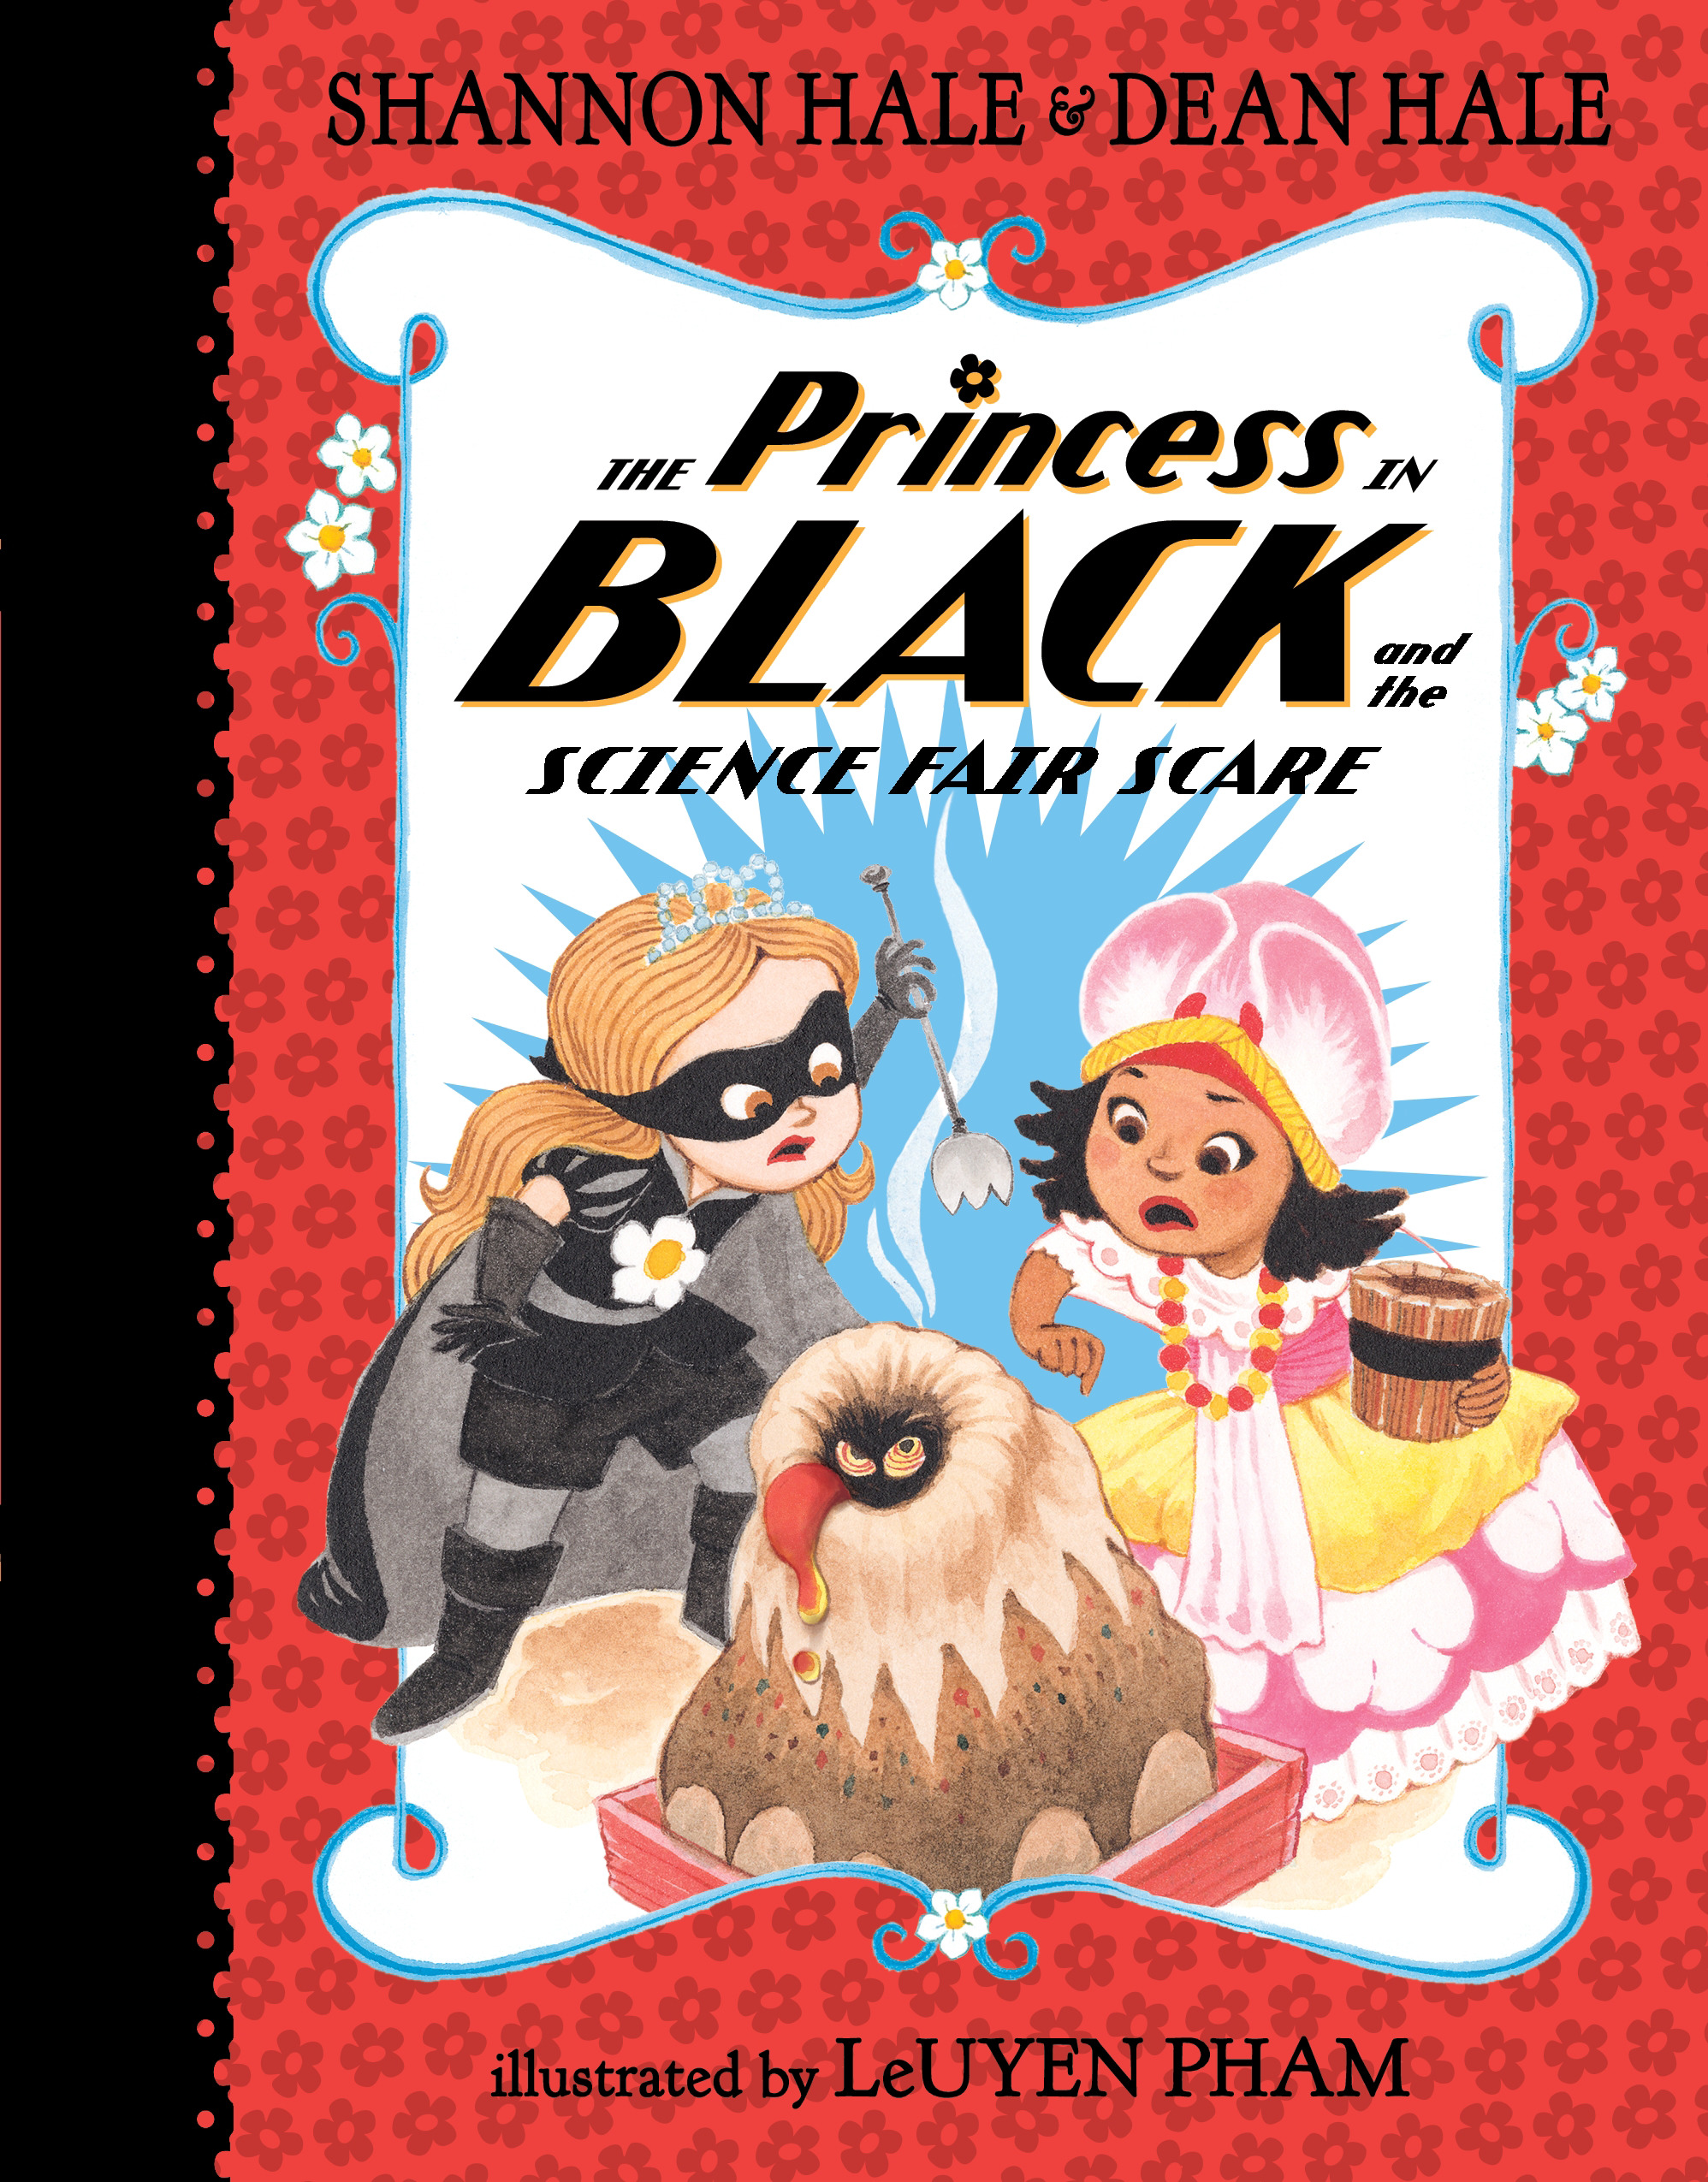 The Princess in Black and the Science Fair Scare | Hale, Shannon